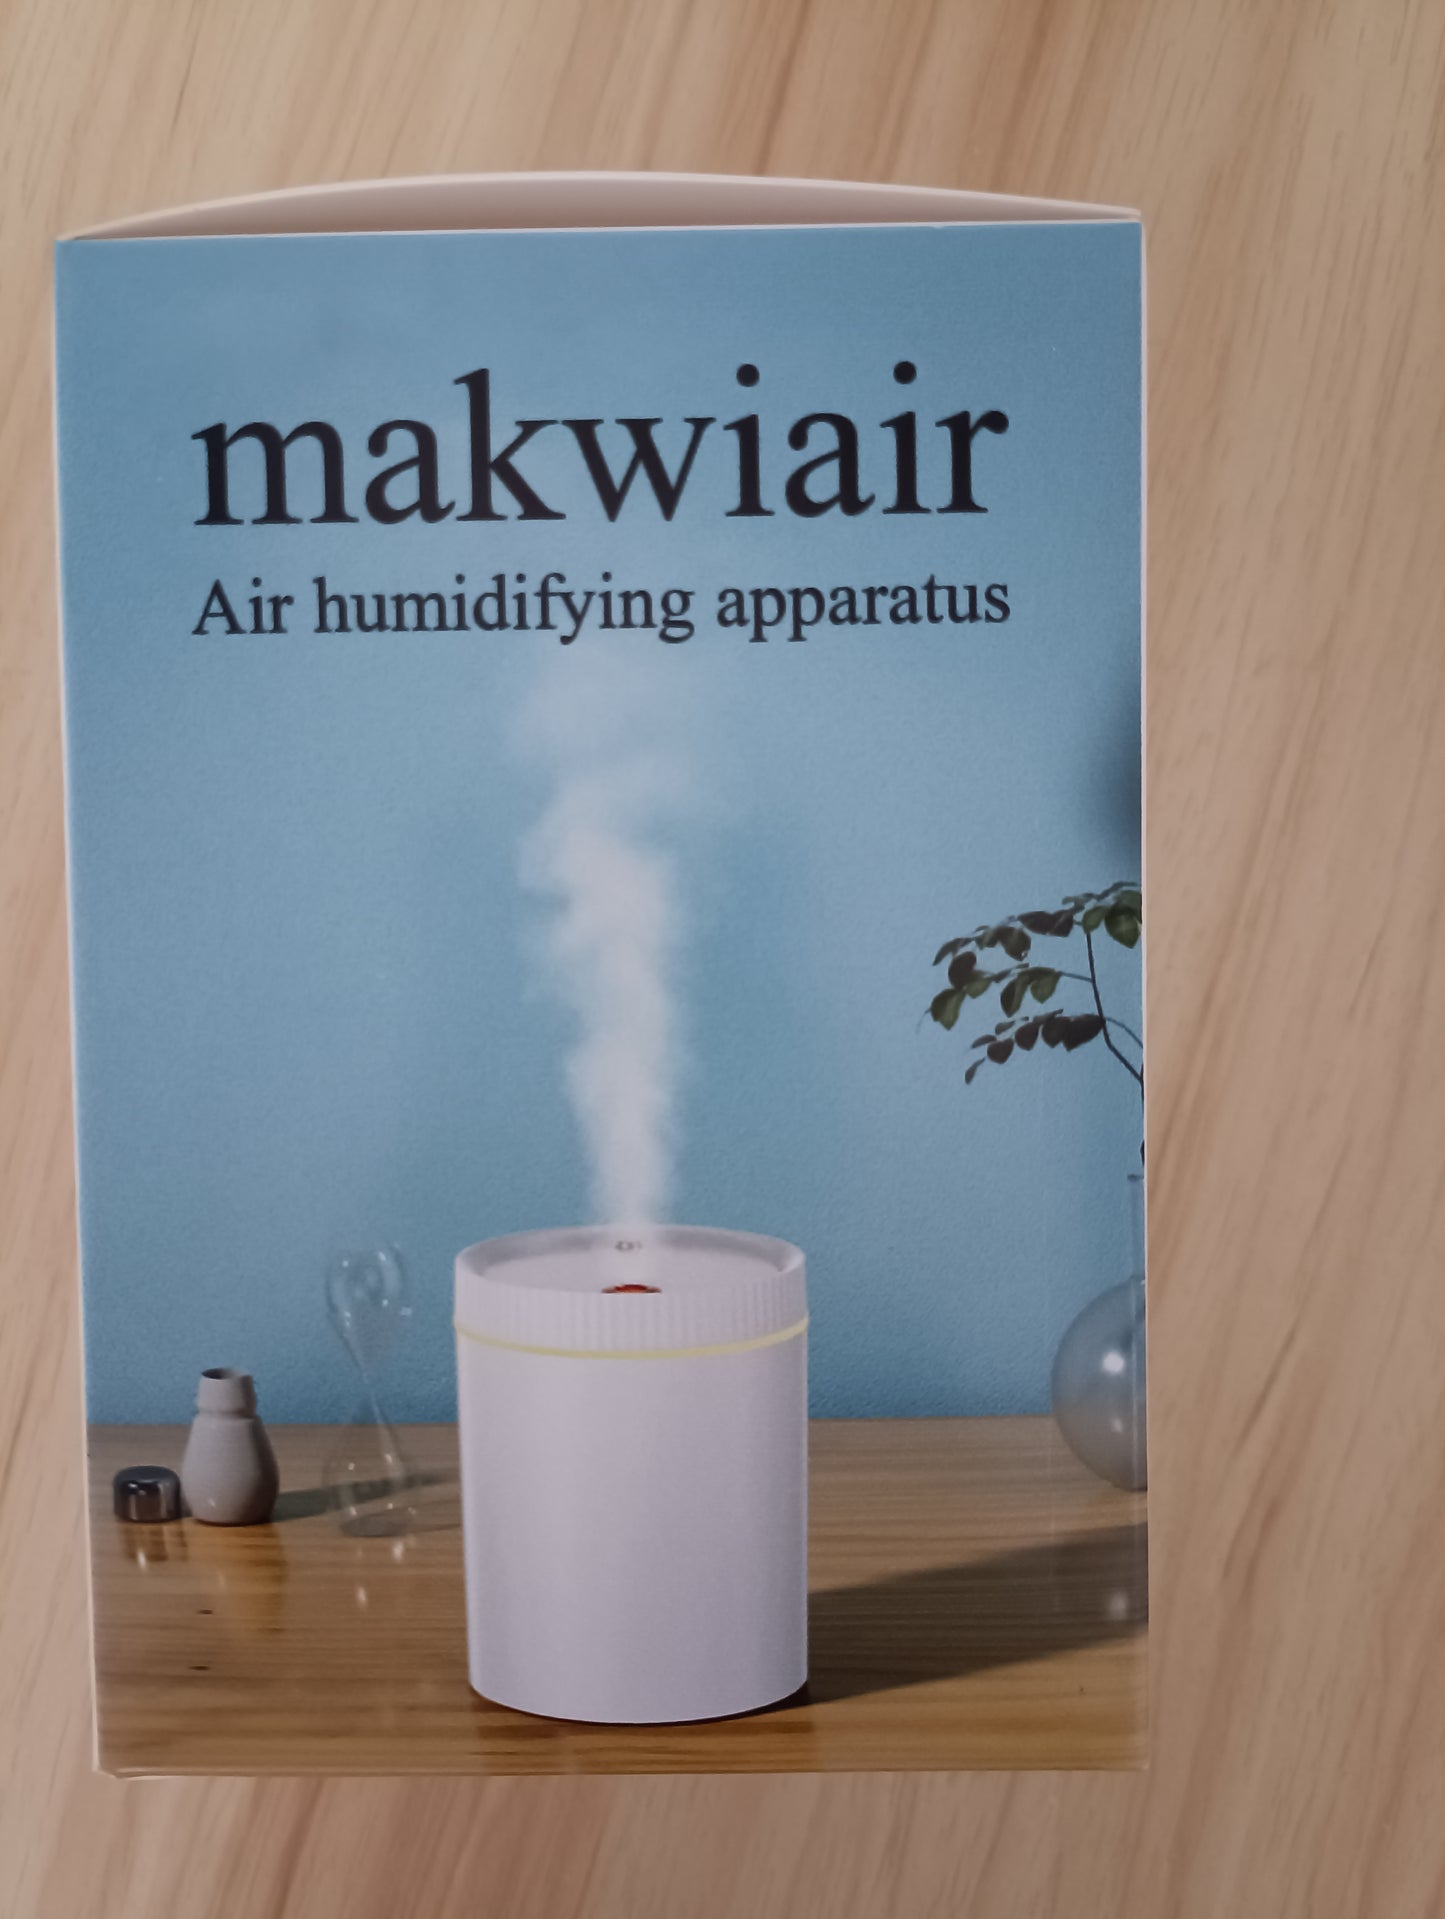 makwiair Air humidifying apparatus comfortable home humidifier mute pregnant women baby bedroom purify air small large mist constant humidity aromatherapy all in one